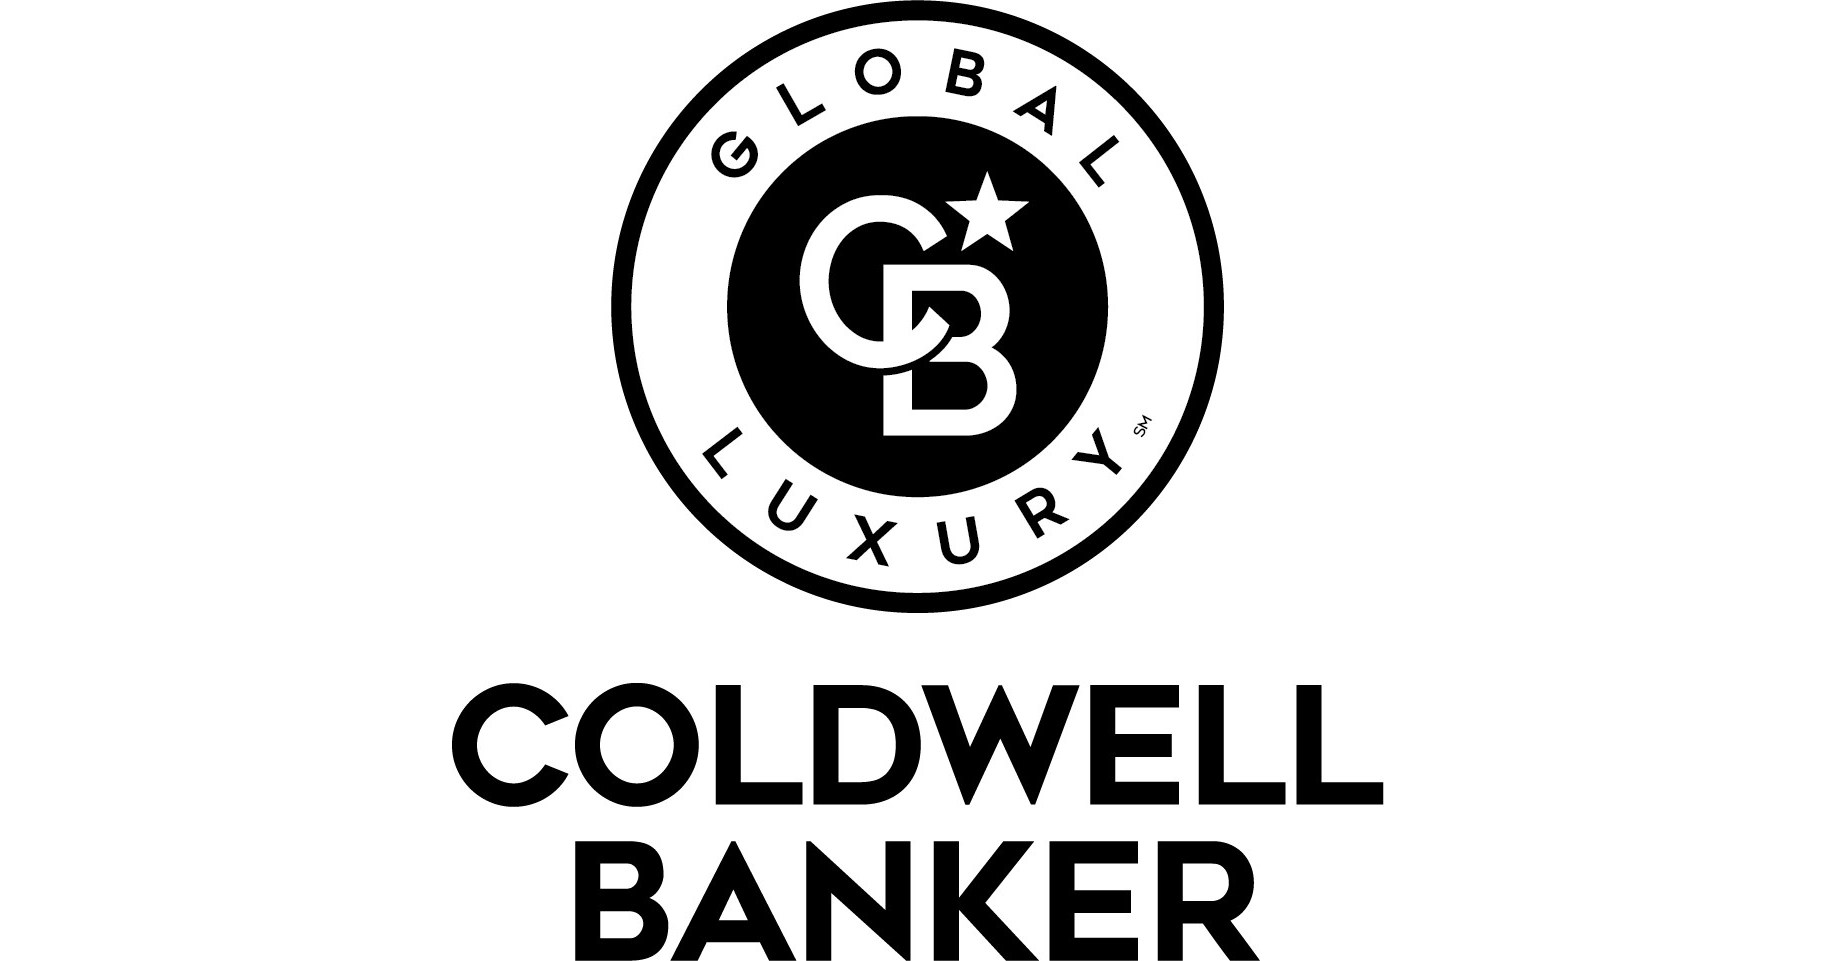 Coldwell Banker Global Luxury’s “The Report” Identifies the 2023 Trends and Opportunity Markets Impacting Global Luxury Real Estate